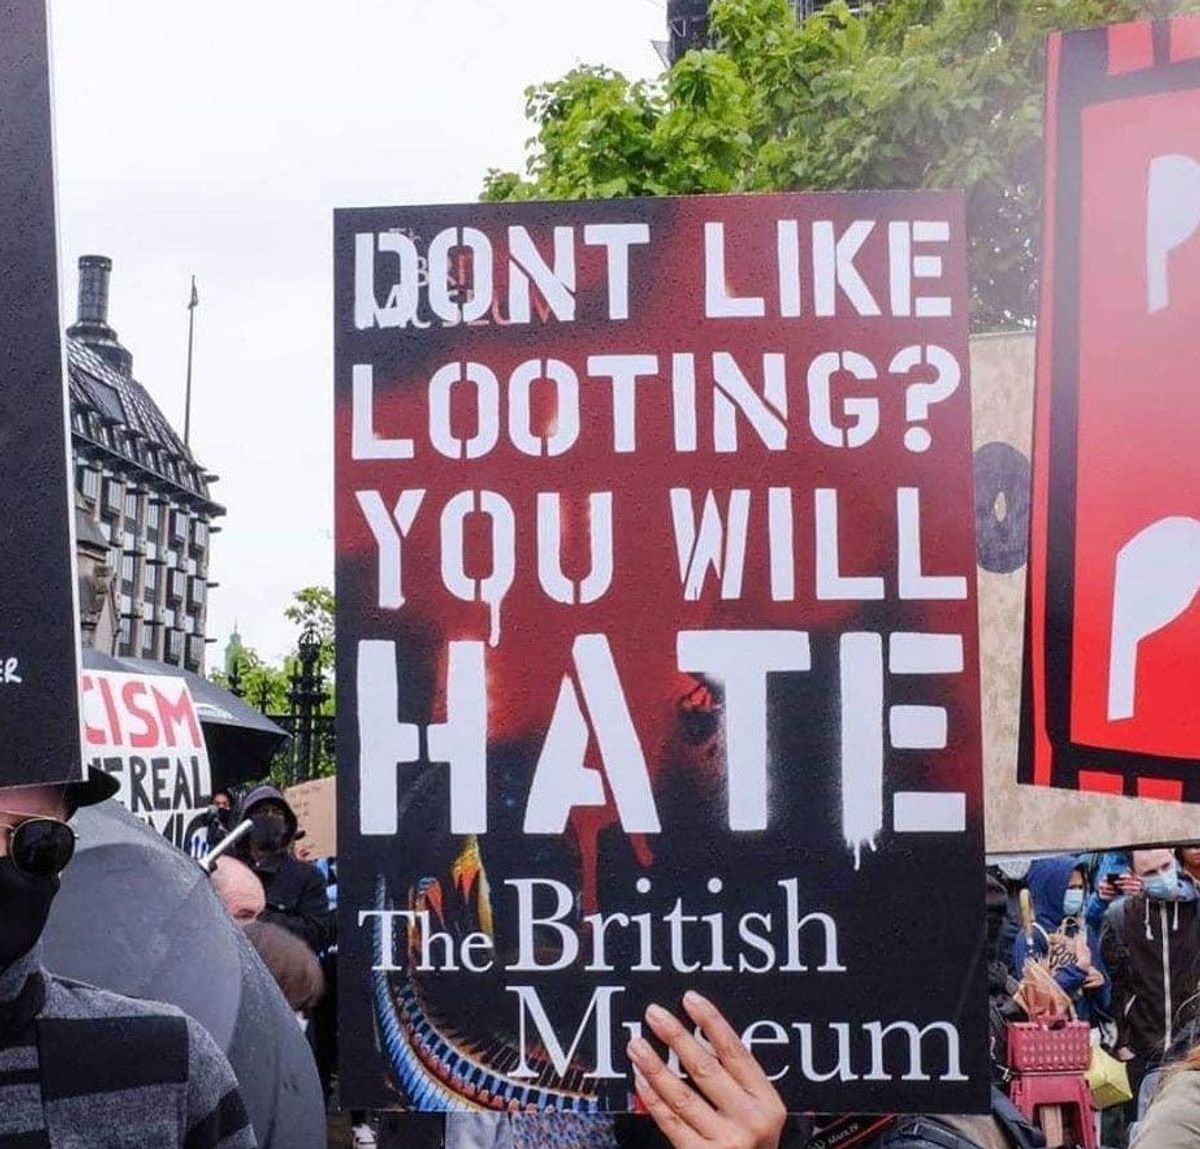 In London, Black Lives Matter demonstrations have highlighted the connection between institutions such as the British Museum and colonial-era looting in Africa. Philip Robins